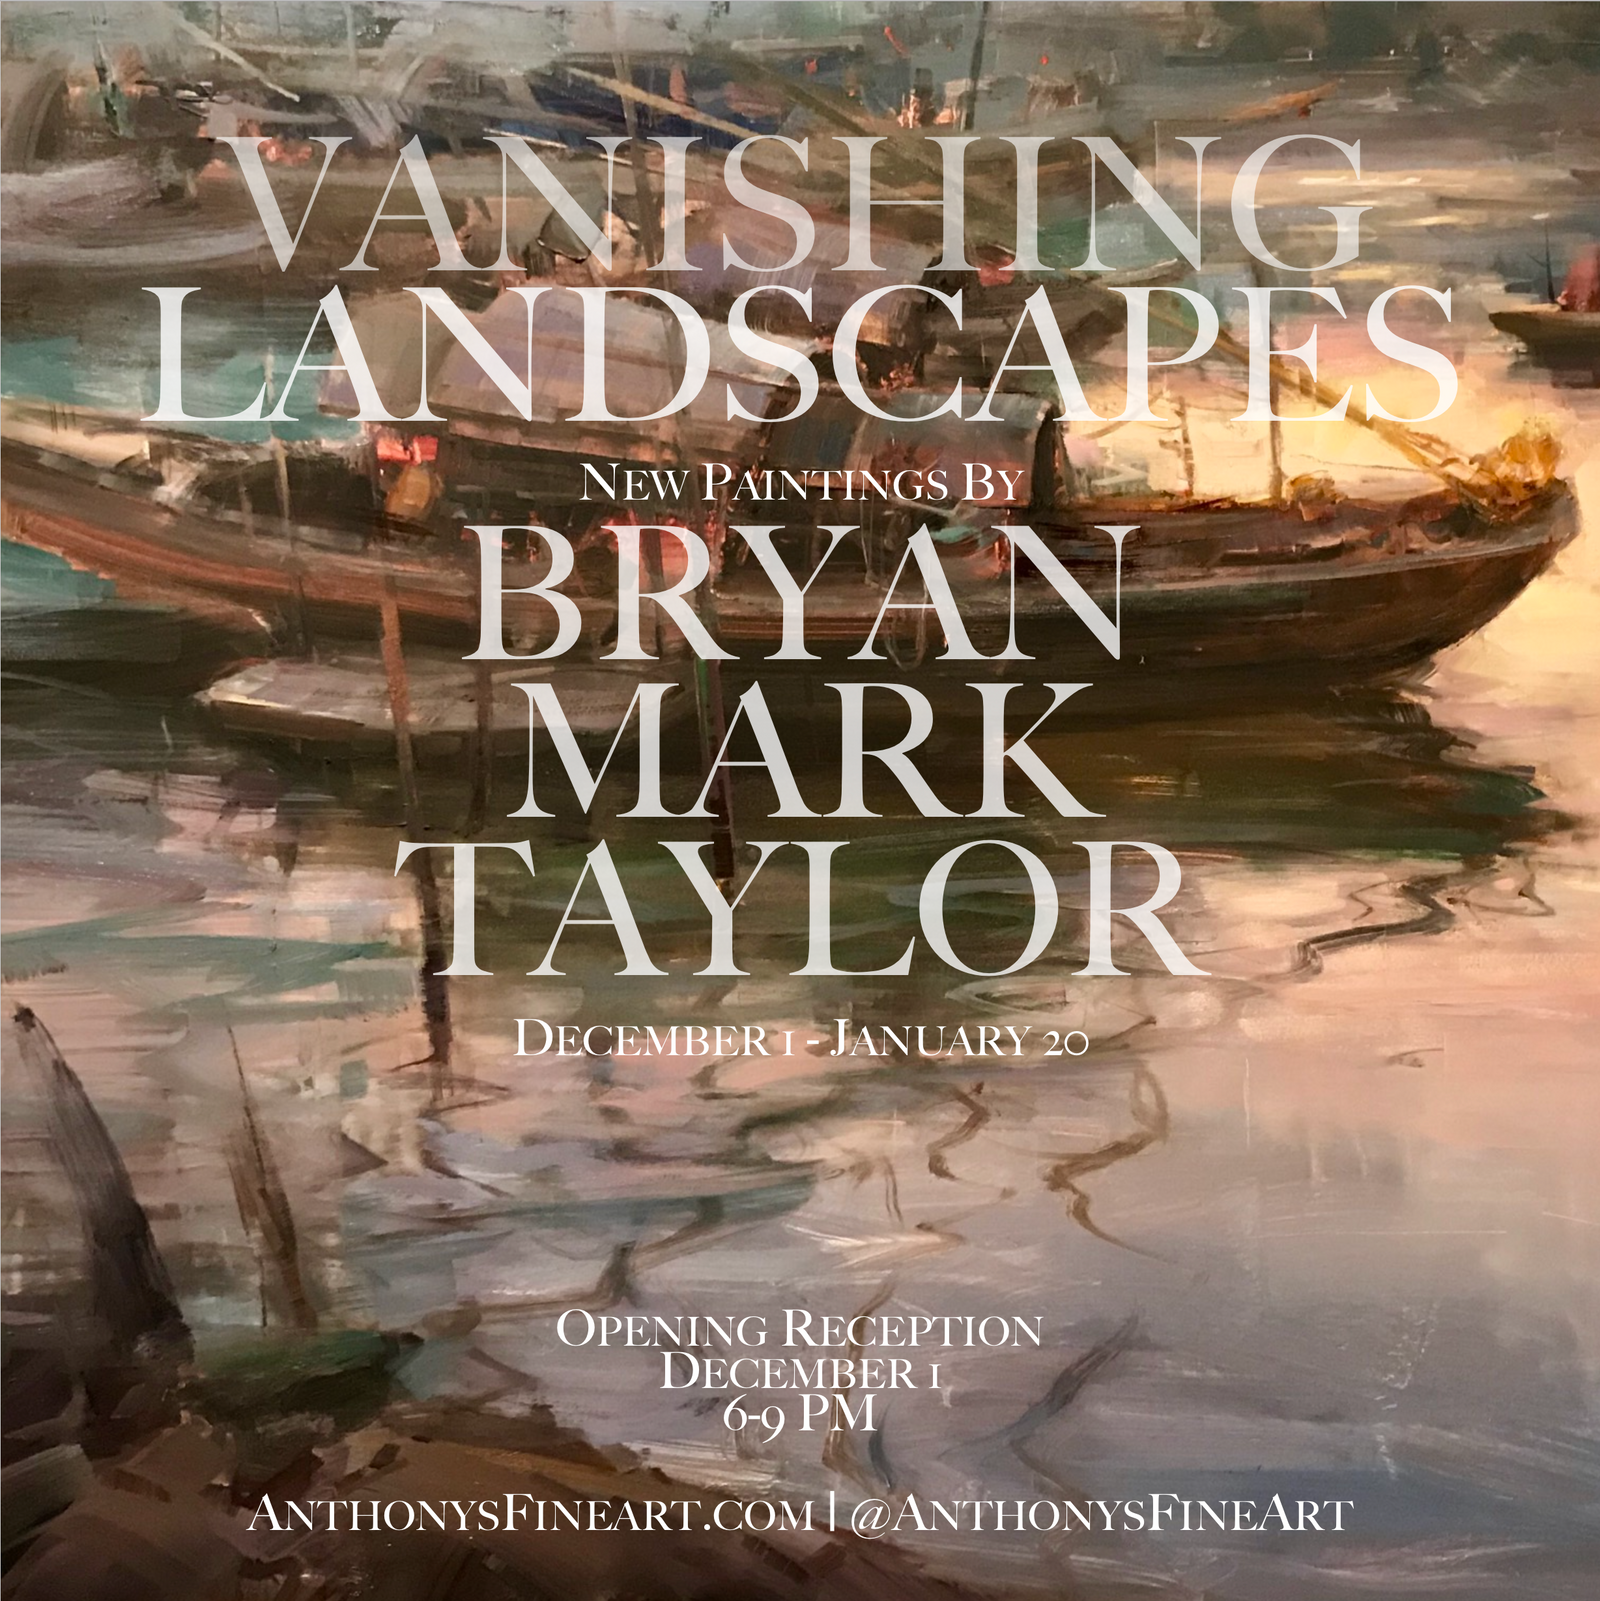 Vanishing Landscapes: New Paintings by Bryan Mark Taylor